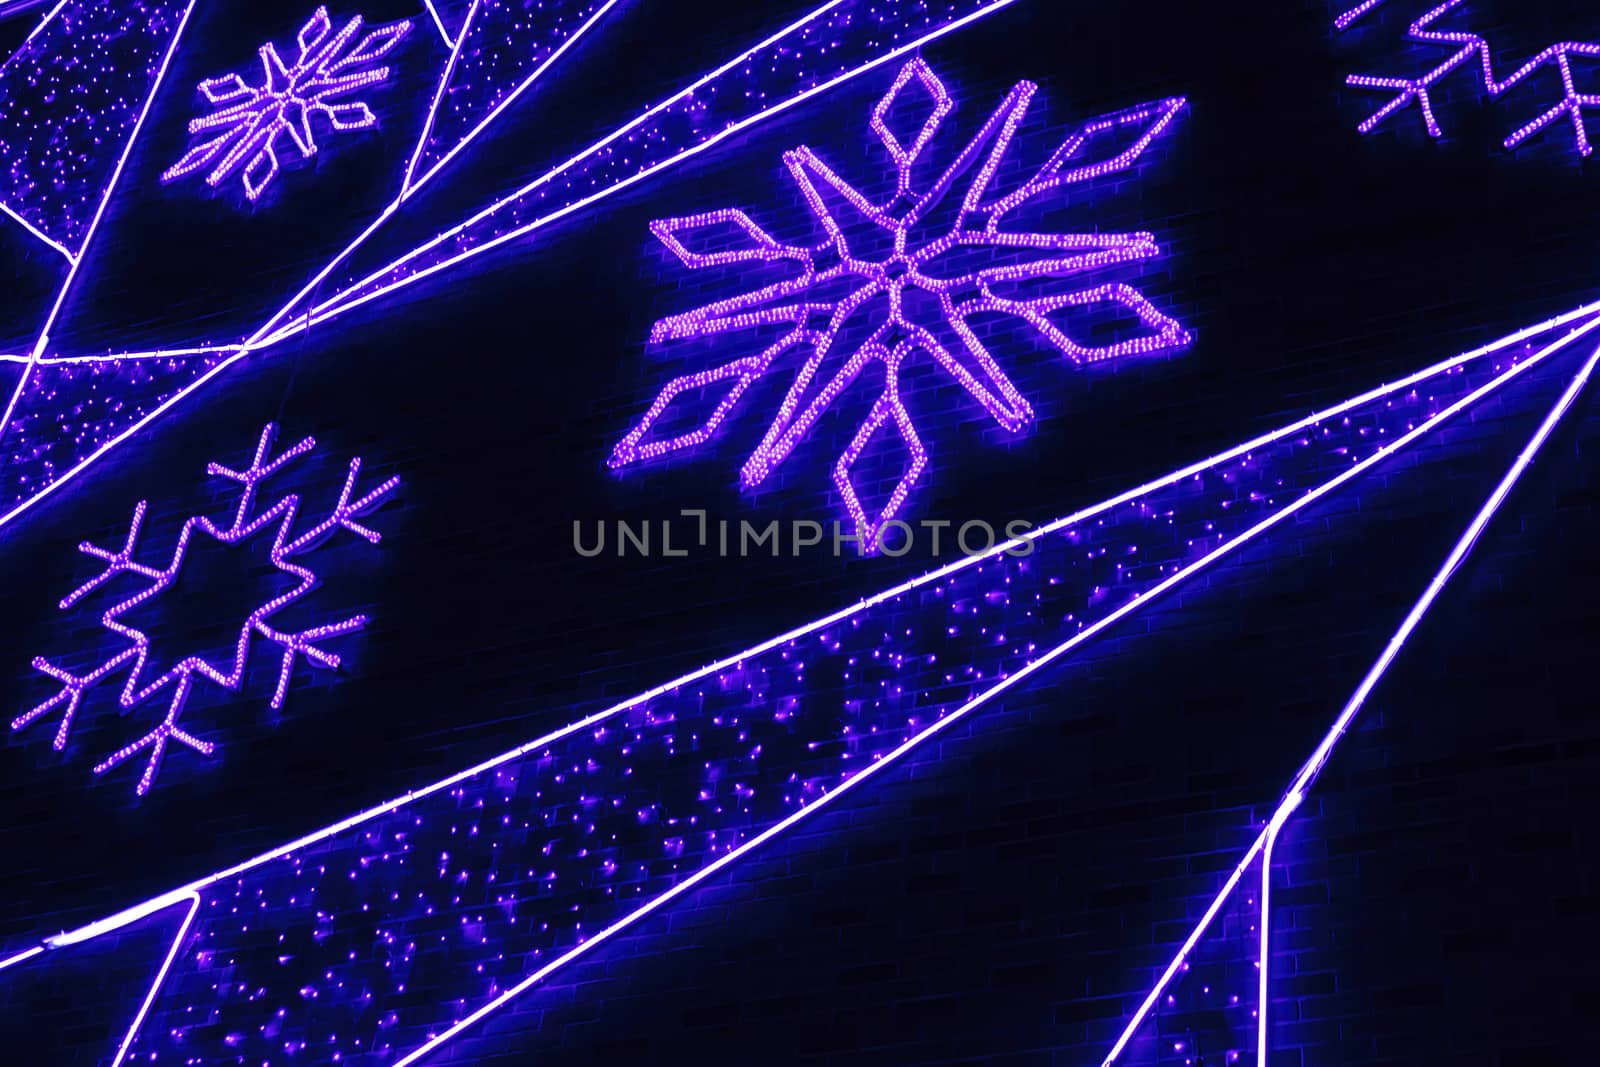 Neon blue lights in the shape of snowflakes on a brick wall. Festive illumination of the night city.